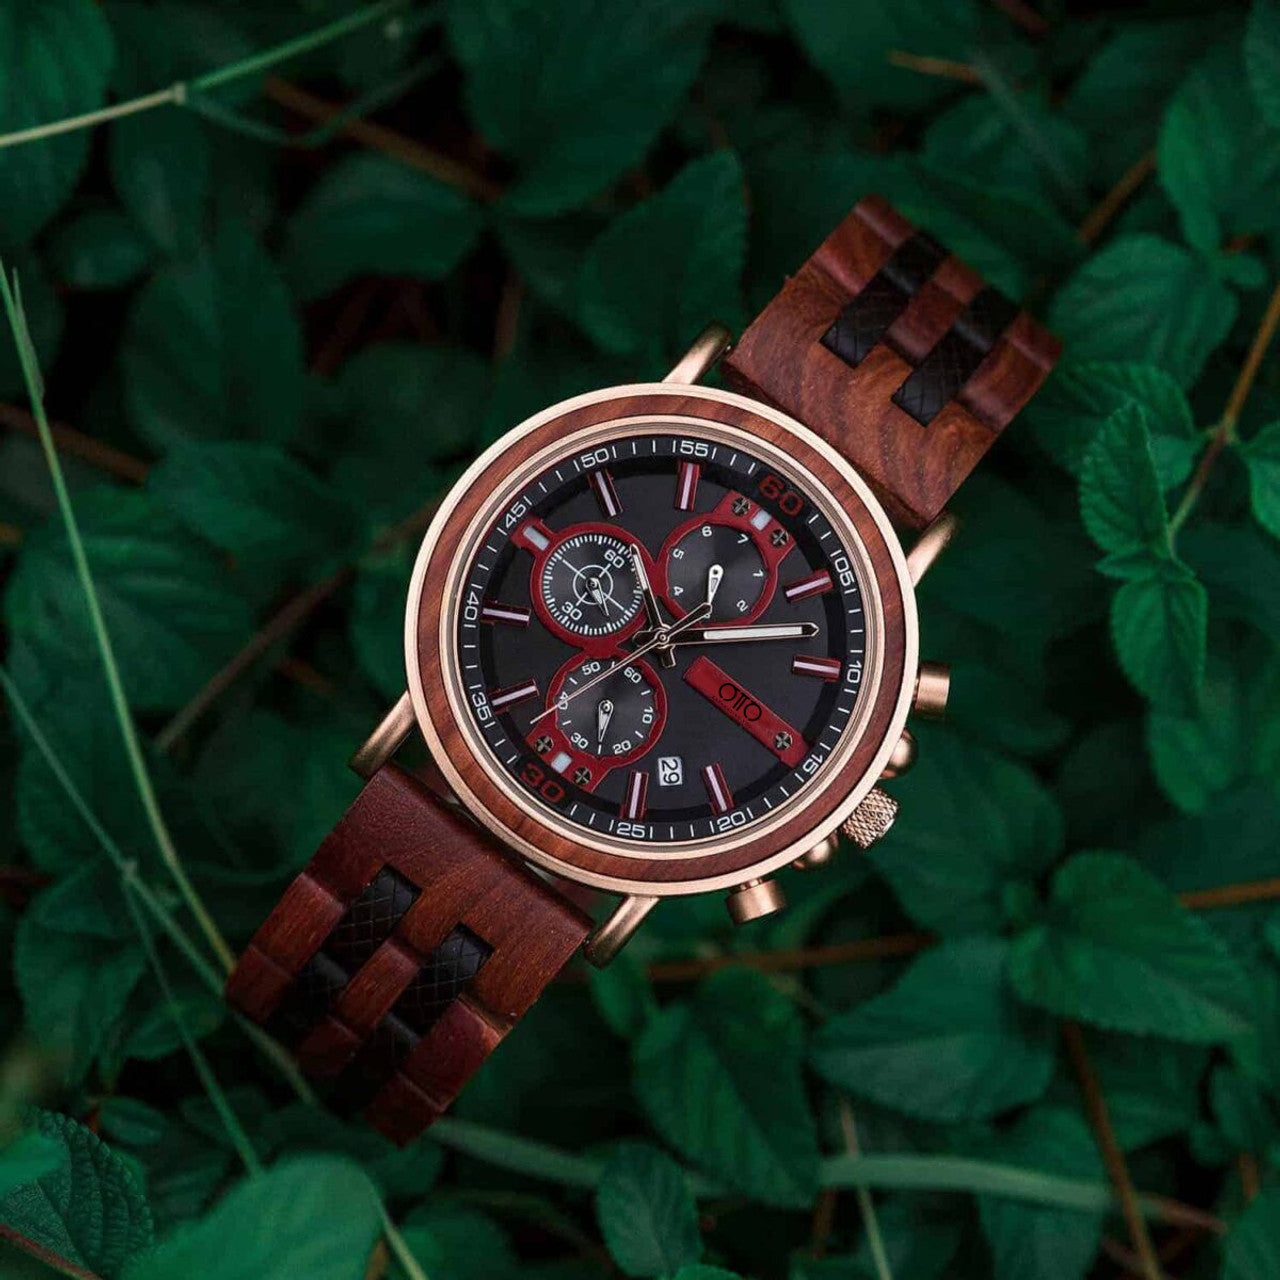 Handmade Recycled Wood Watches – The Sustainable Watch Company